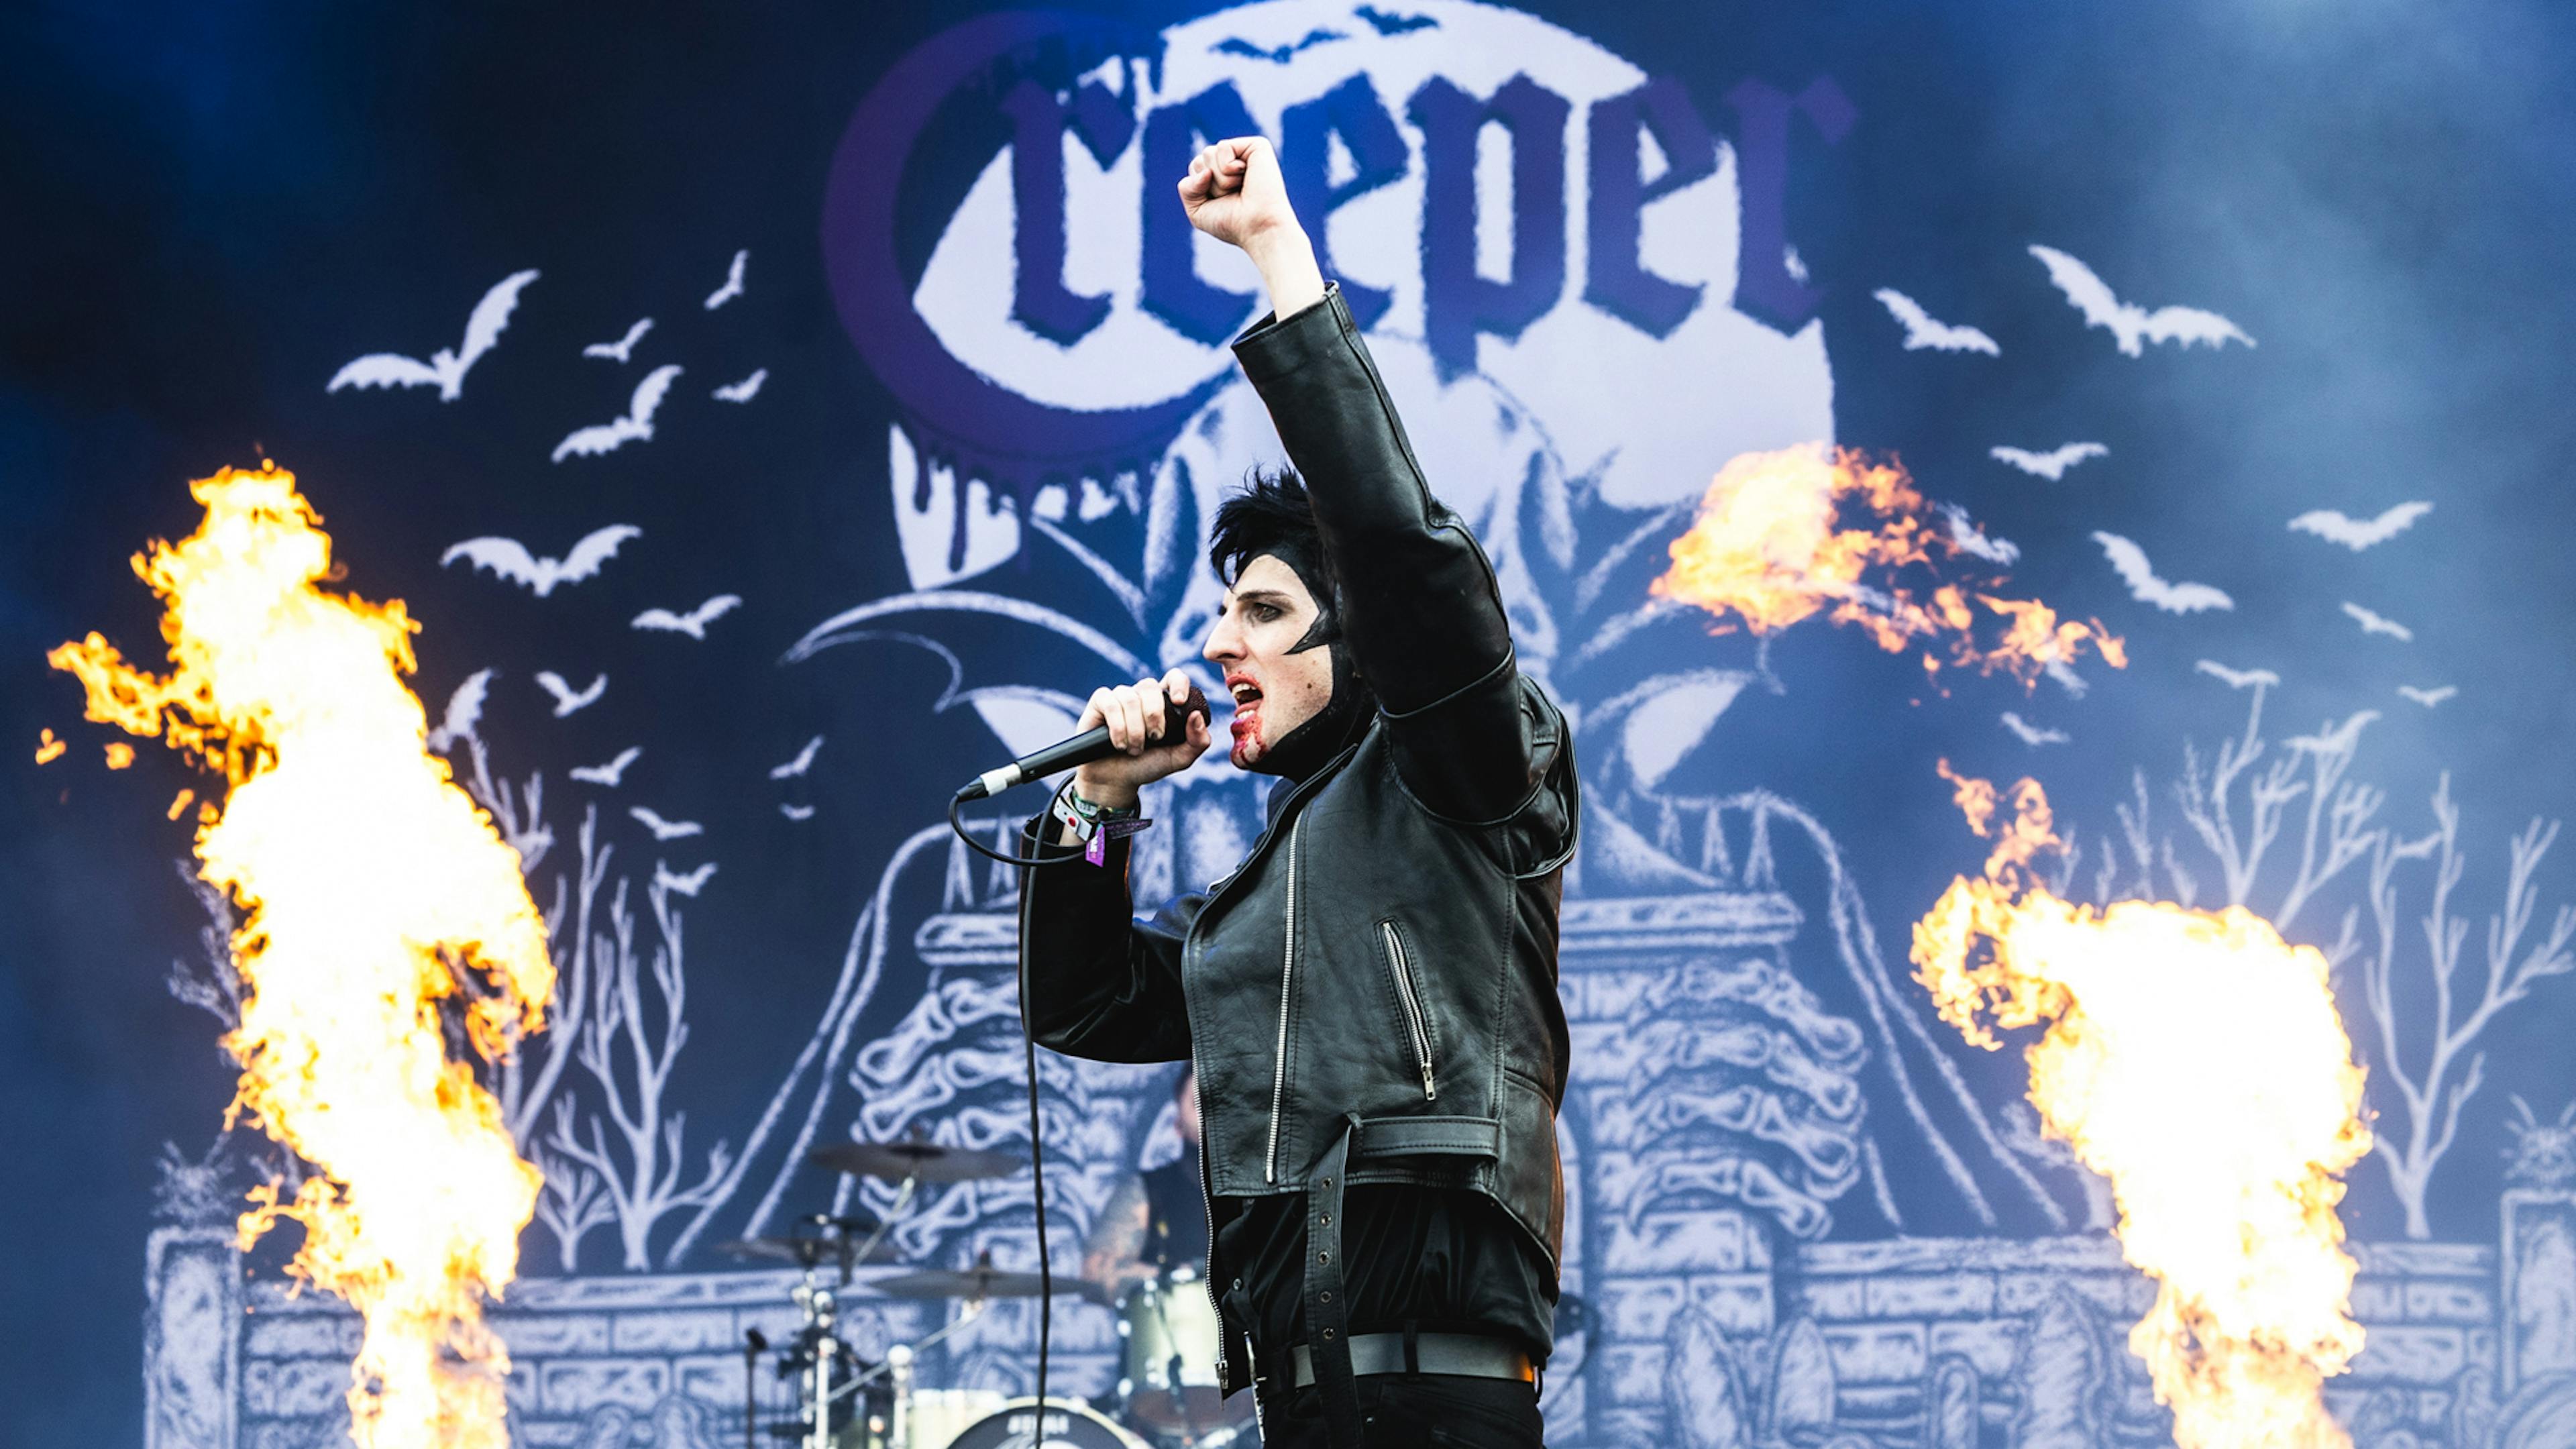 Creeper announce extra UK dates after Wembley Arena